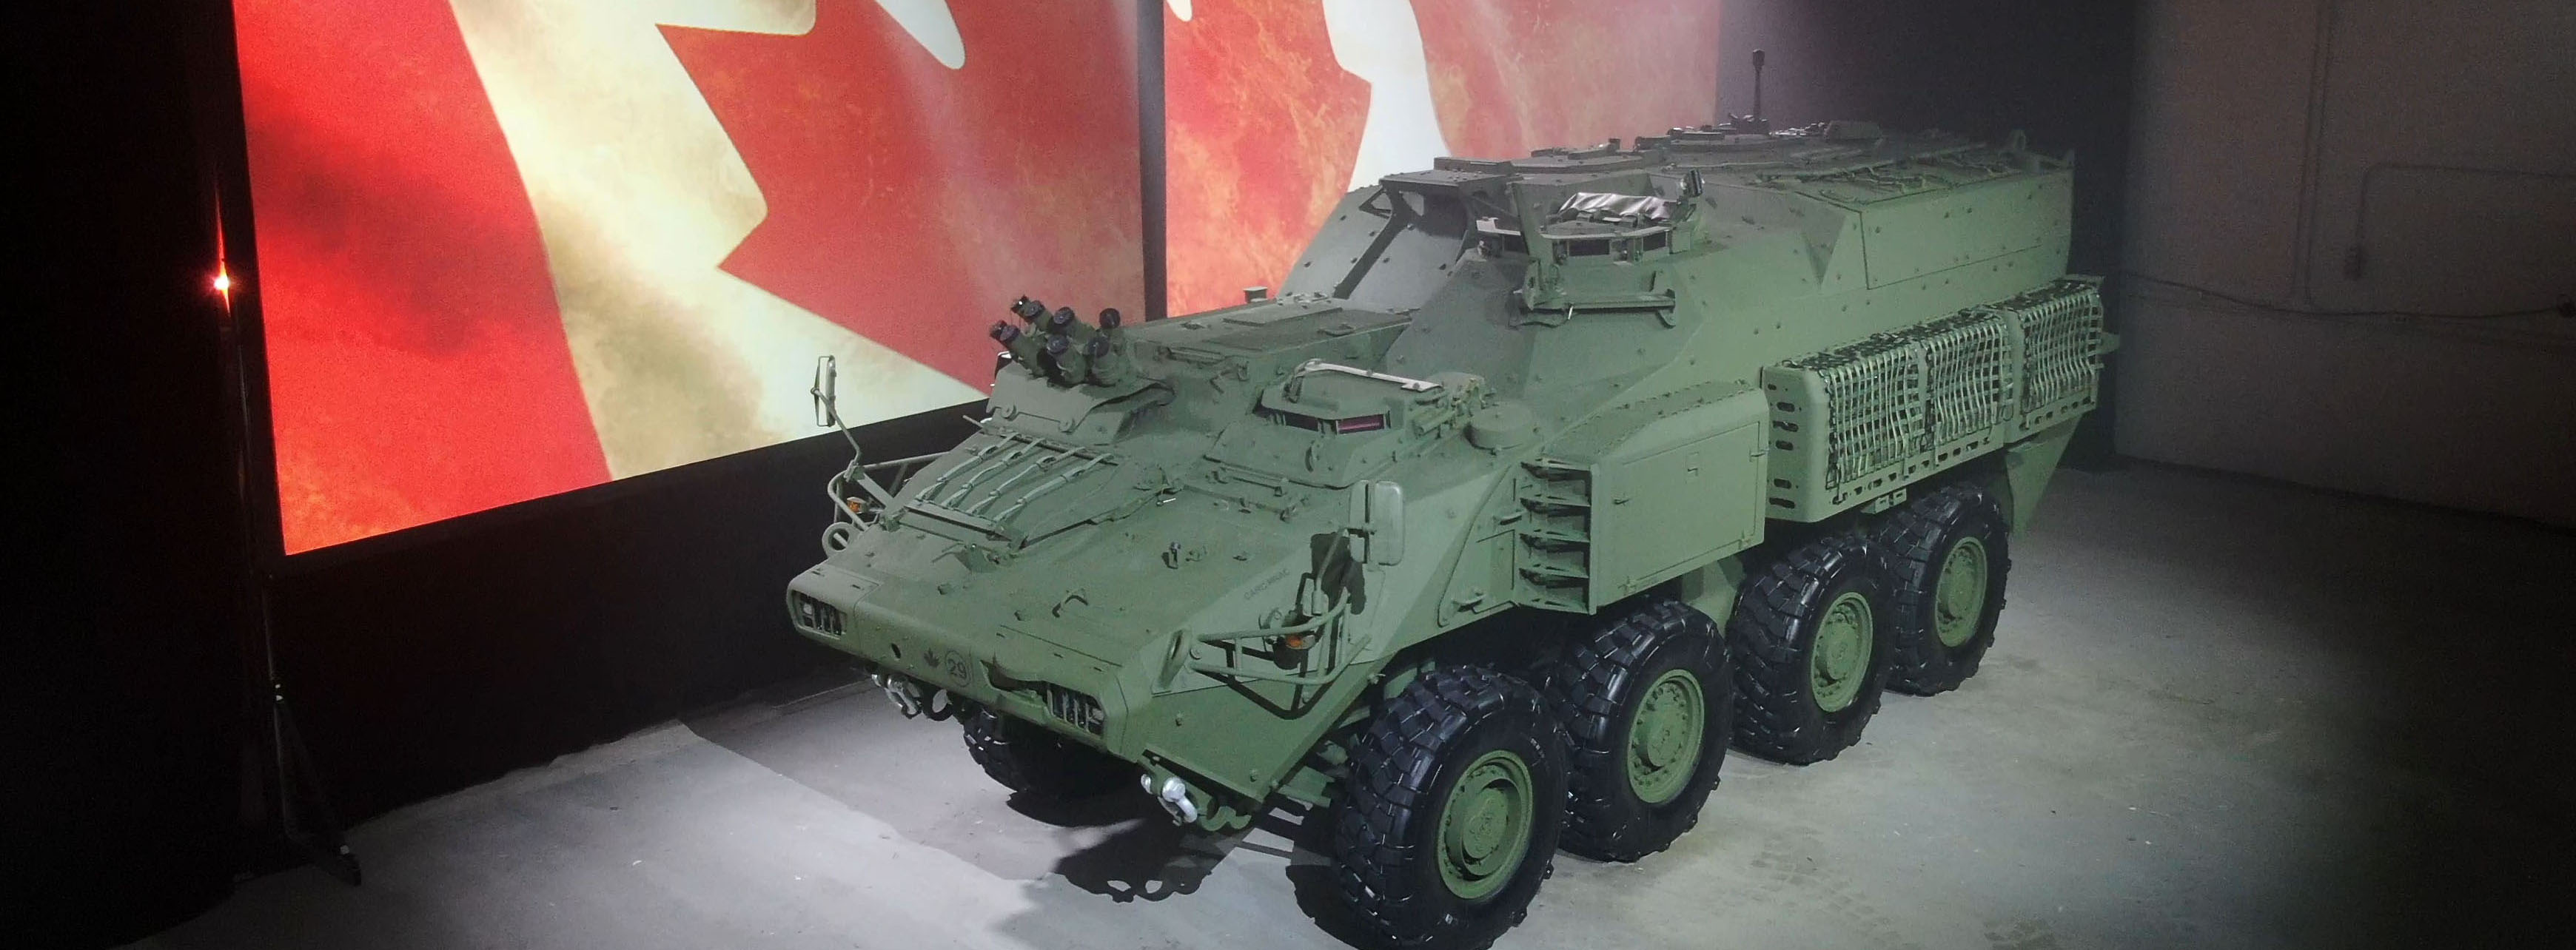 GDLS Canada Broadcasts Virtual Armoured Combat Support Vehicle (ACSV) Roll-out Ceremony